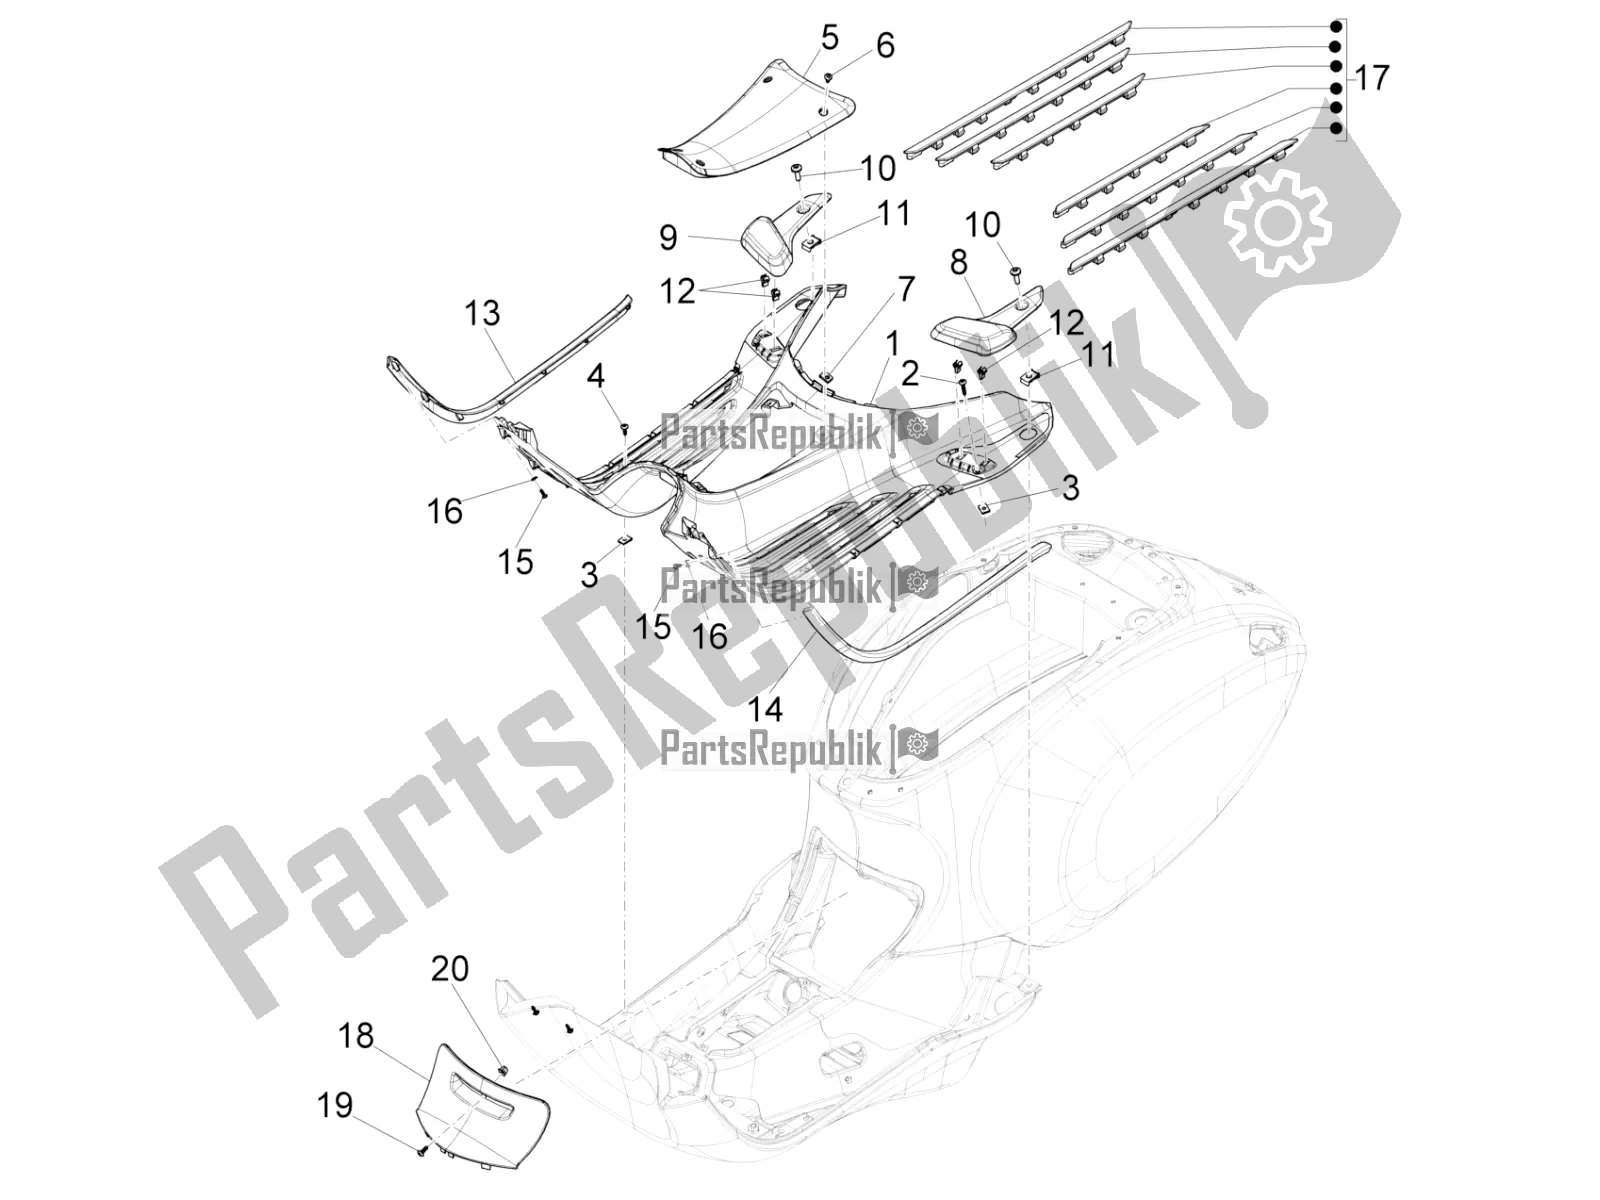 All parts for the Central Cover - Footrests of the Vespa Sprint 150 Iget ABS Apac 2021